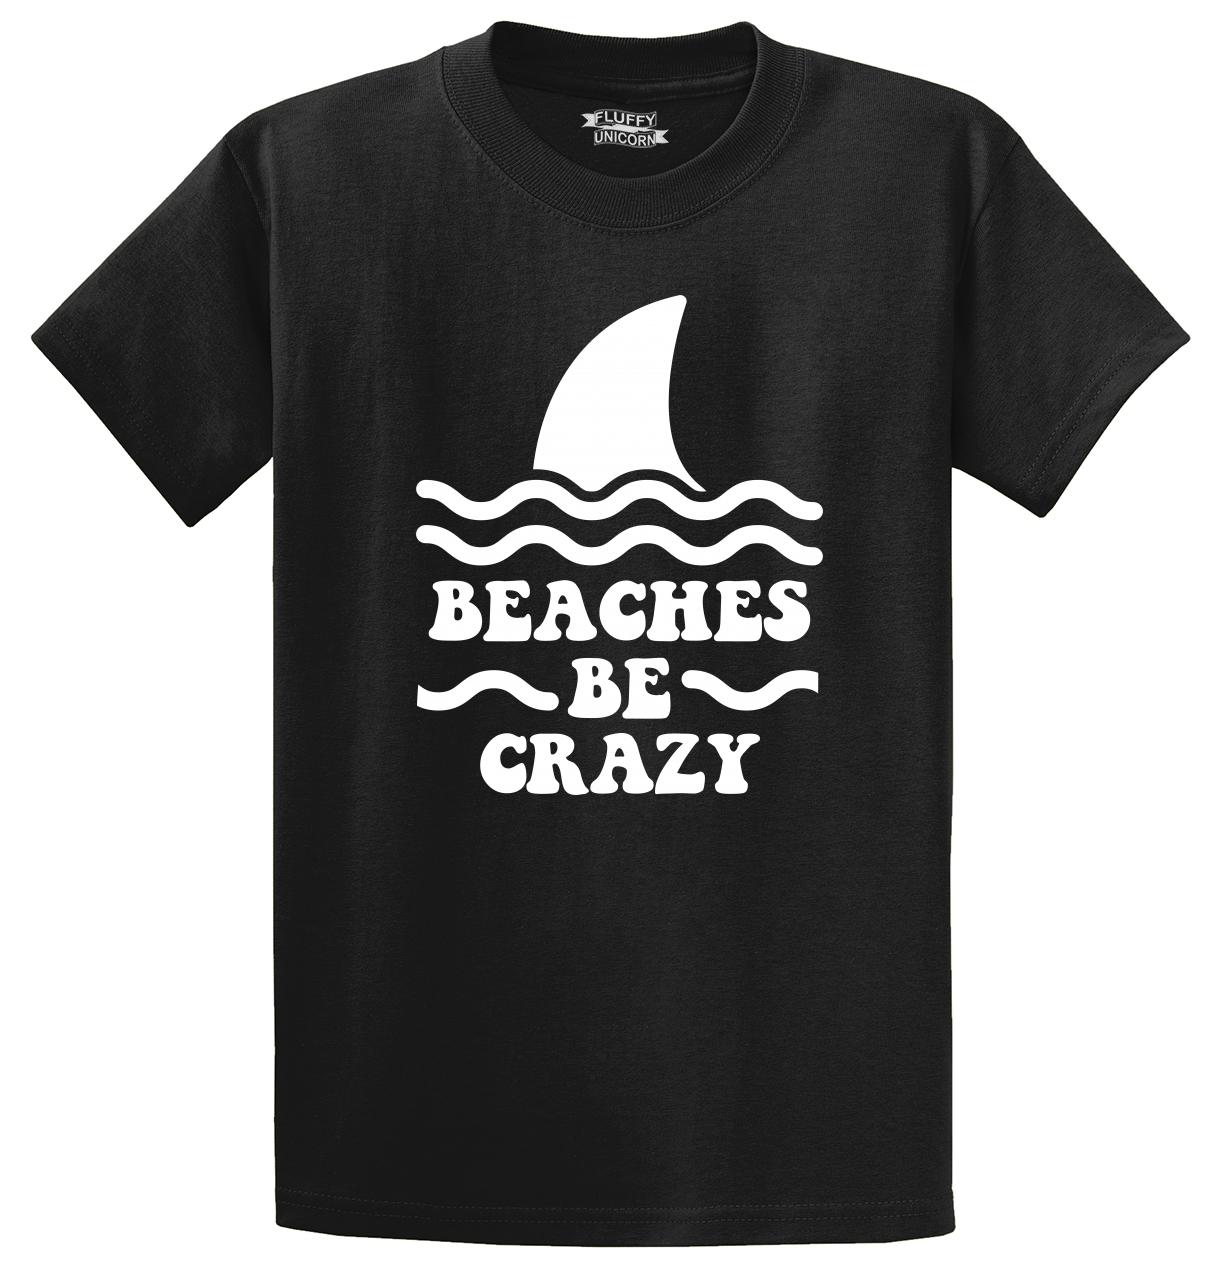 Salty Lil' Beach Graphic Summer Vacation Tee Funny Vintage Men's T Shirt Cotton